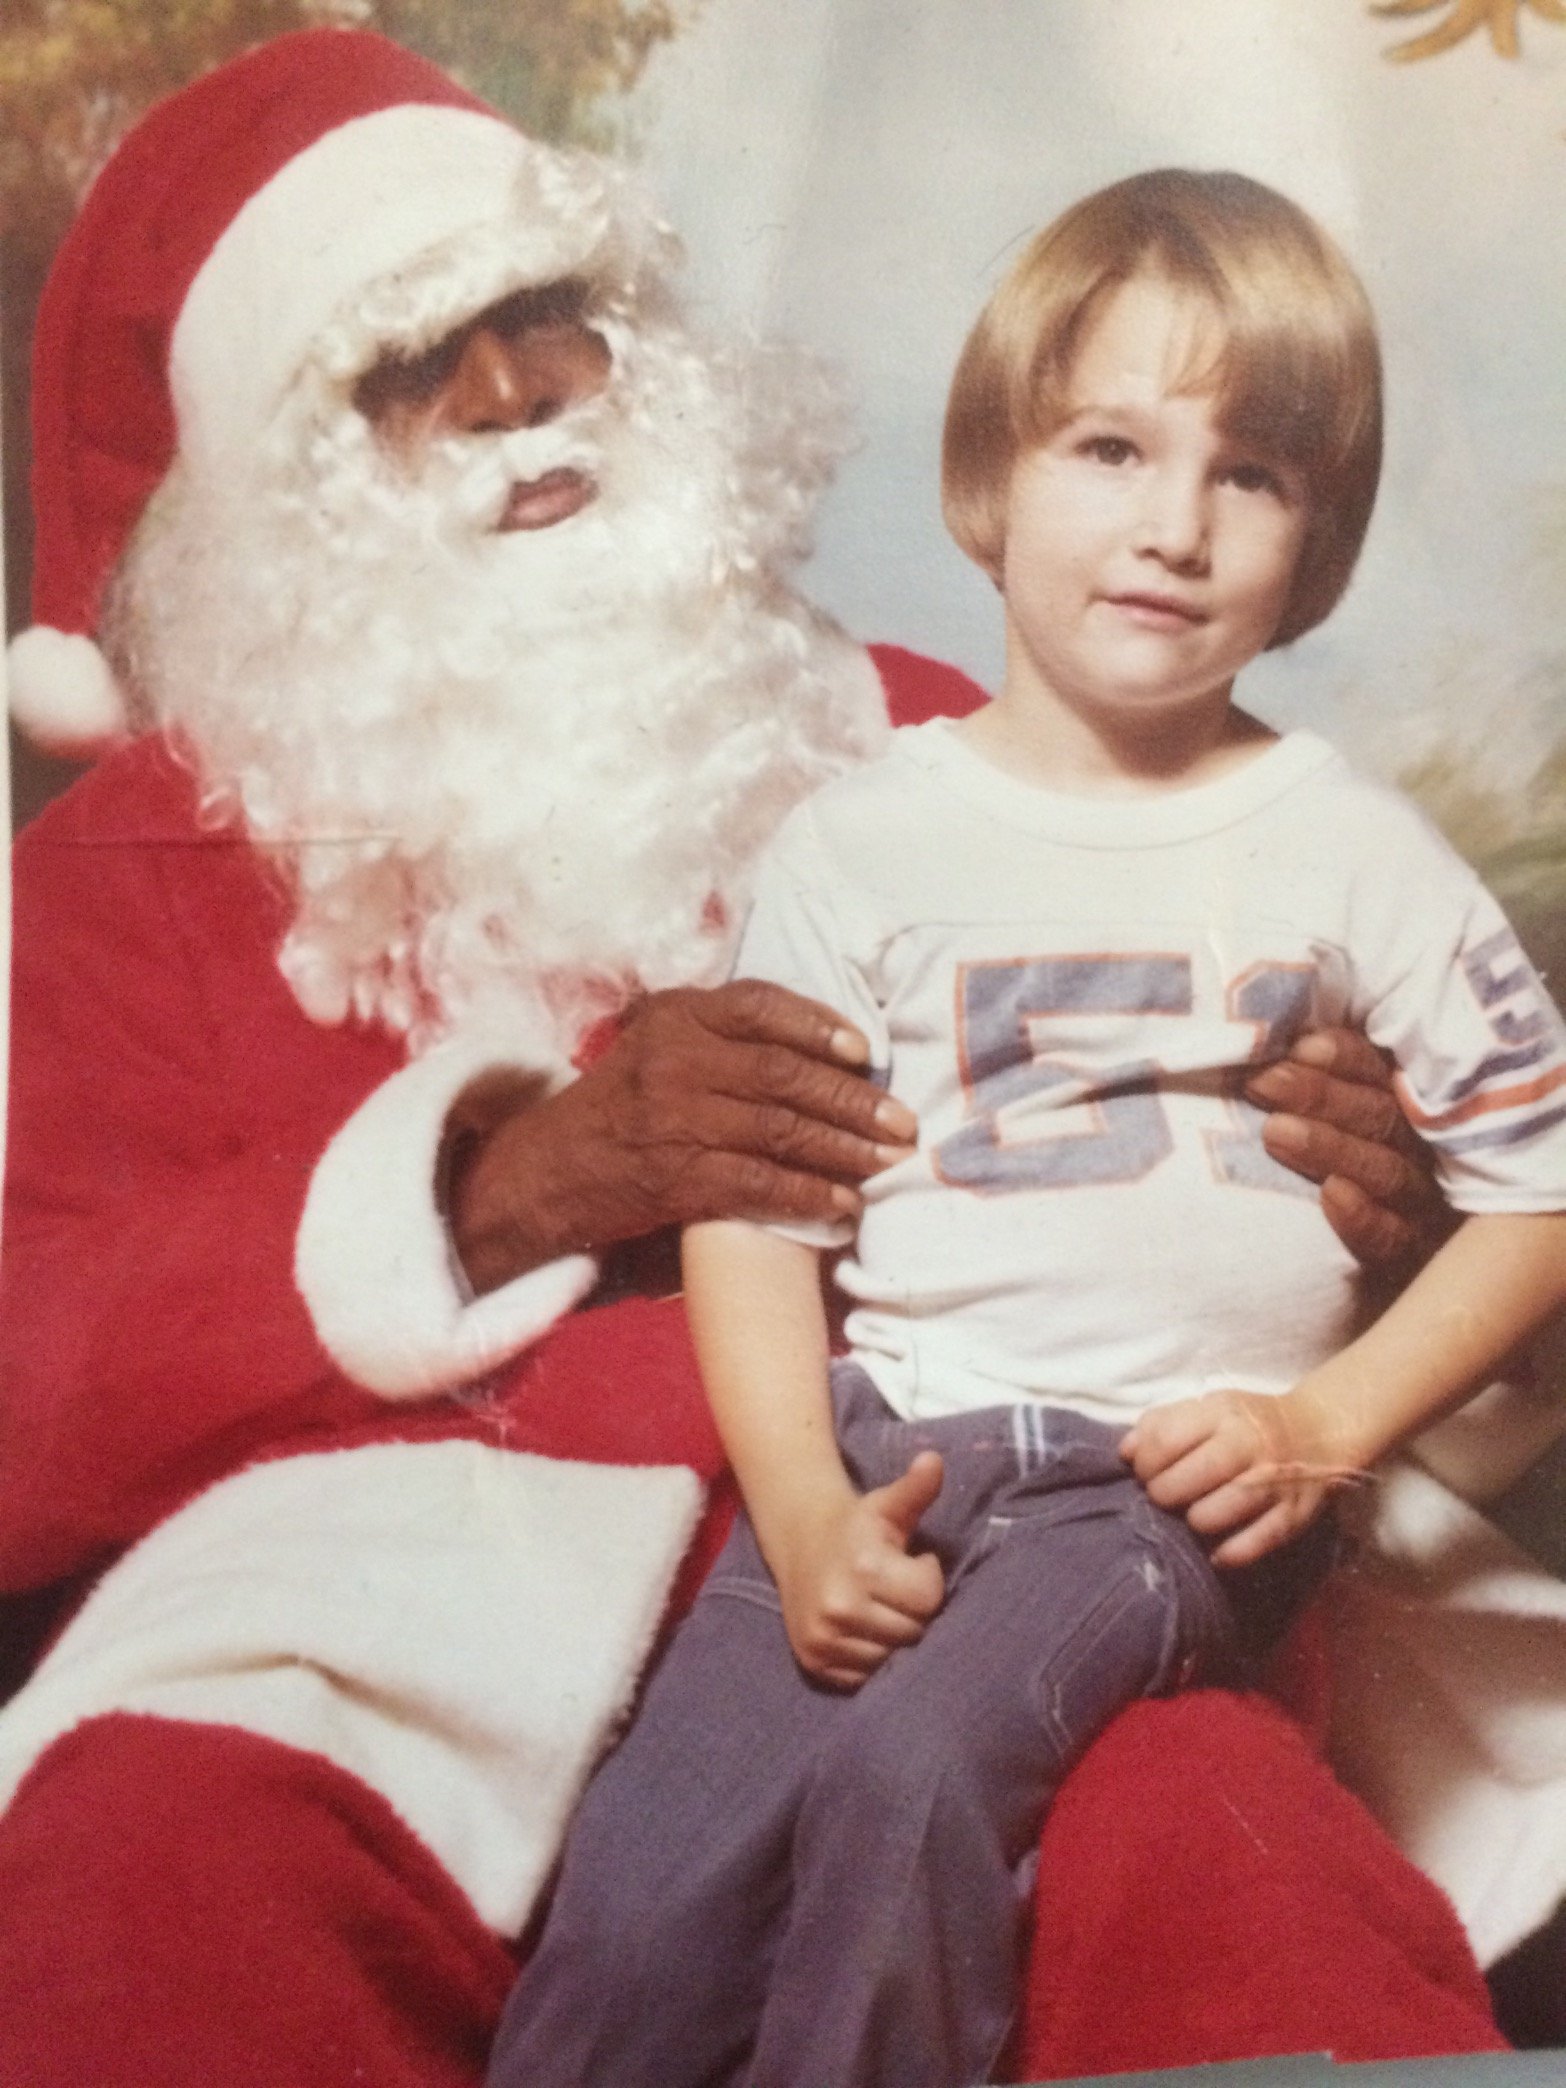 Father, Pet Whisperer.. Profile pic is from my Head Start days in Montgomery, AL circa 1979. I loved it and our black santa\handy man!!!